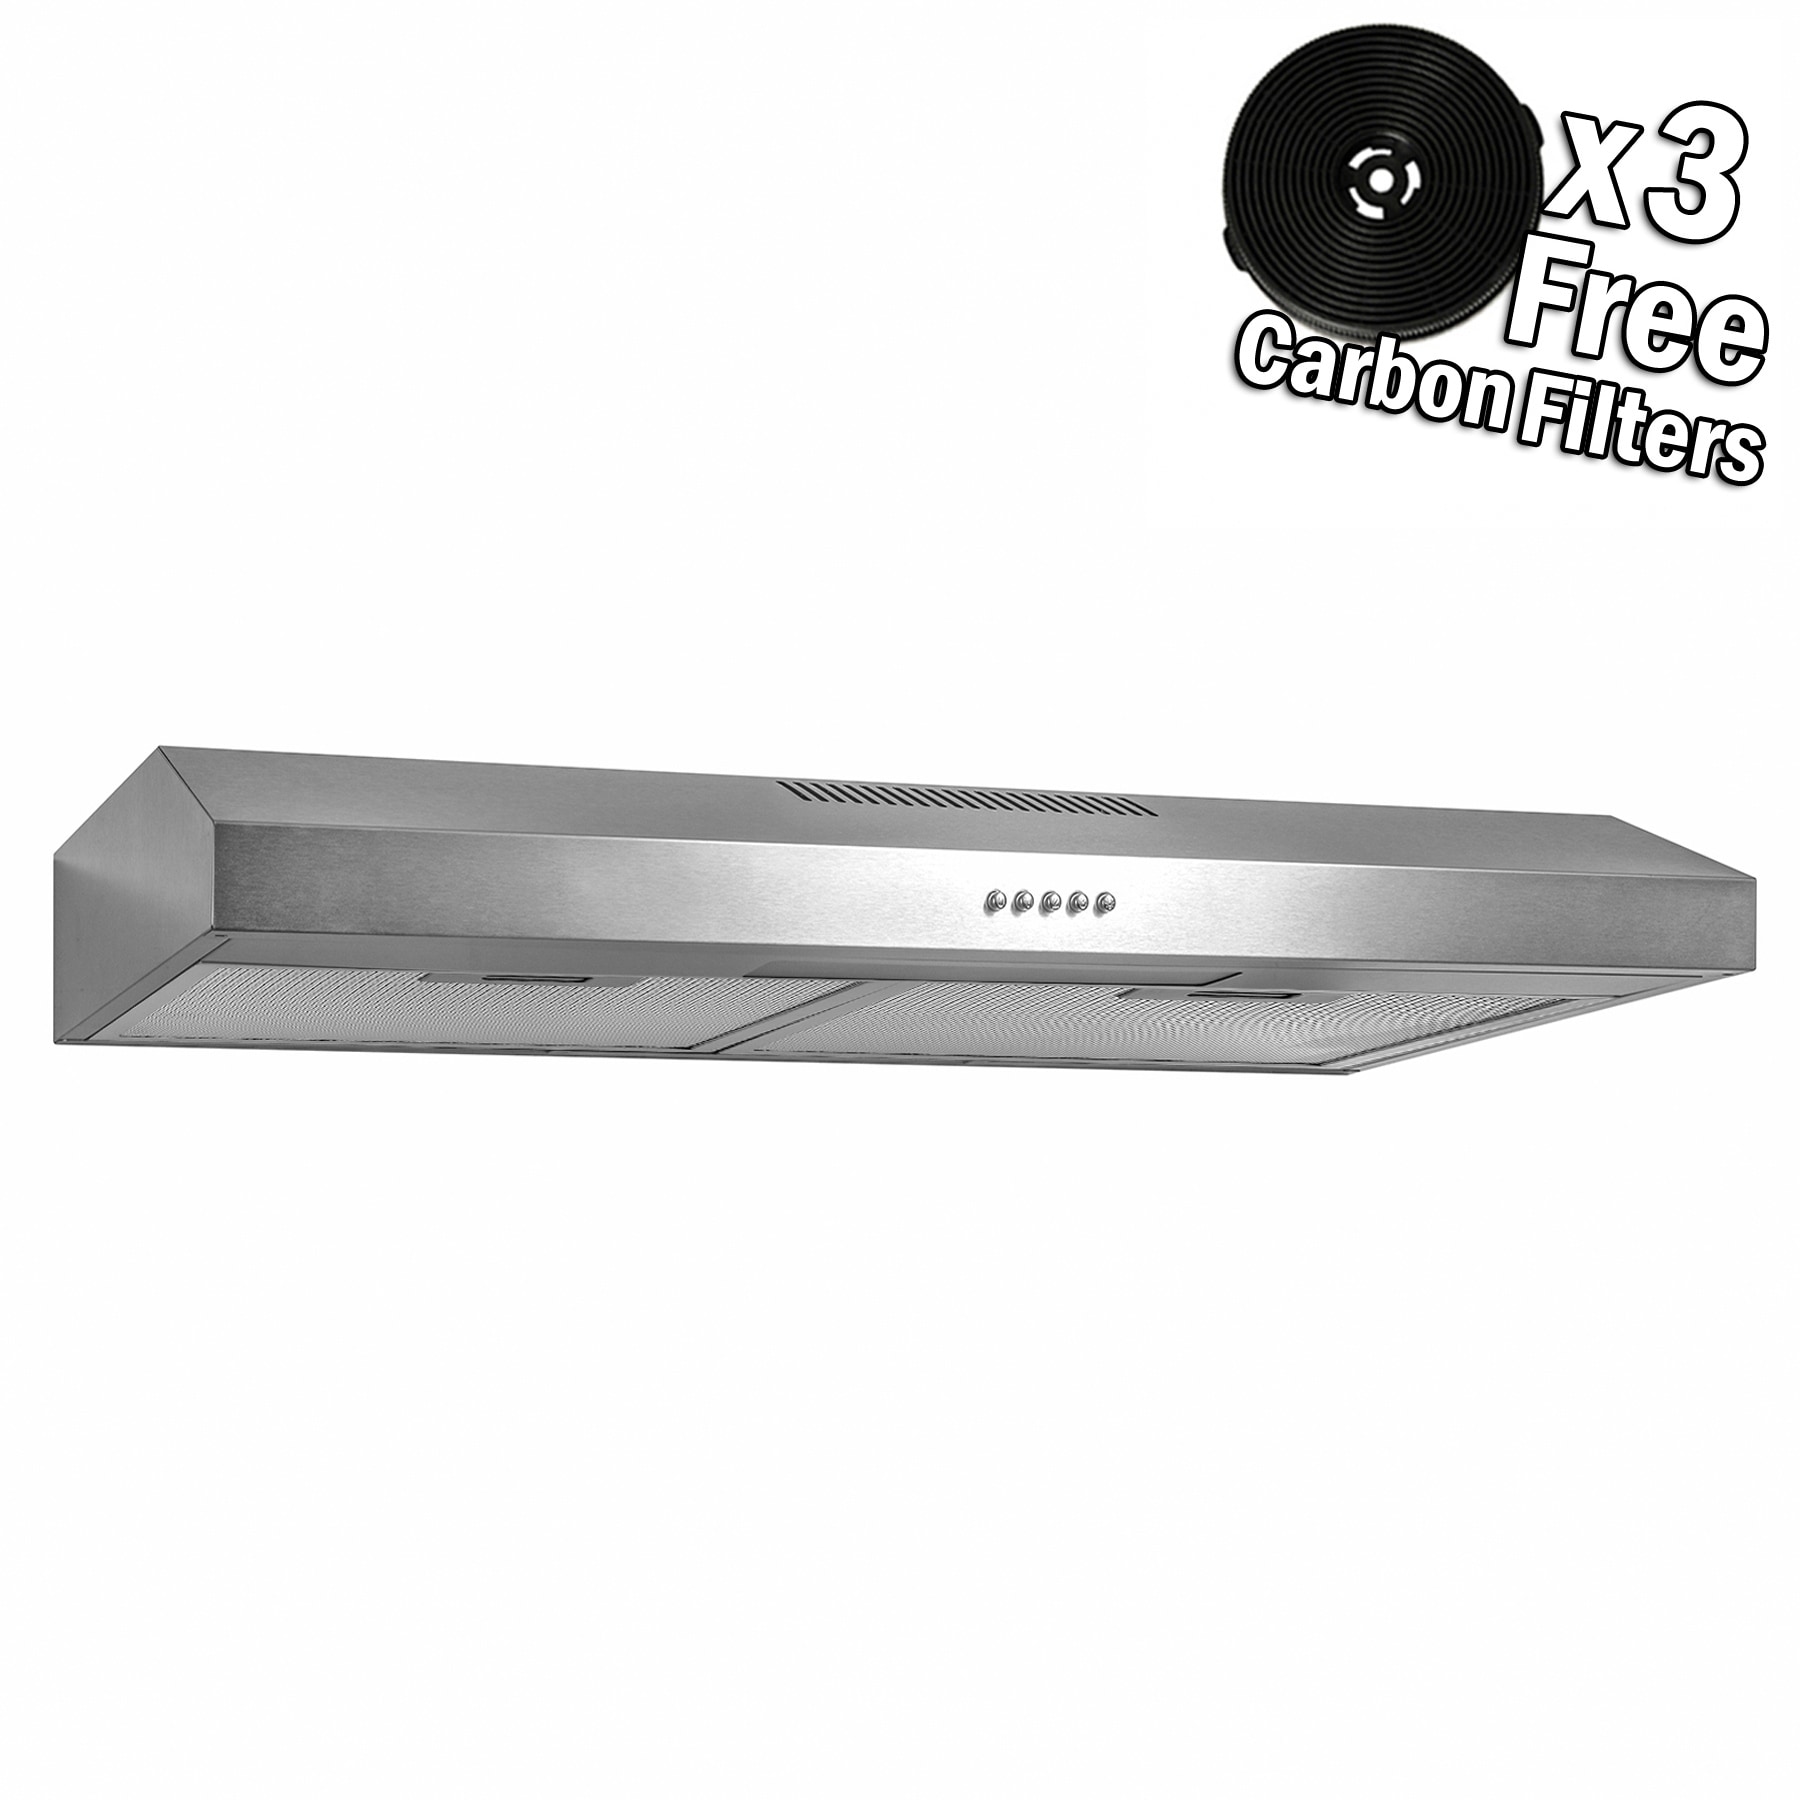 AKDY 24" Under Cabinet Stainless Steel Push Panel Kitchen Range Hood Cooking Fan w/ Carbon Filters